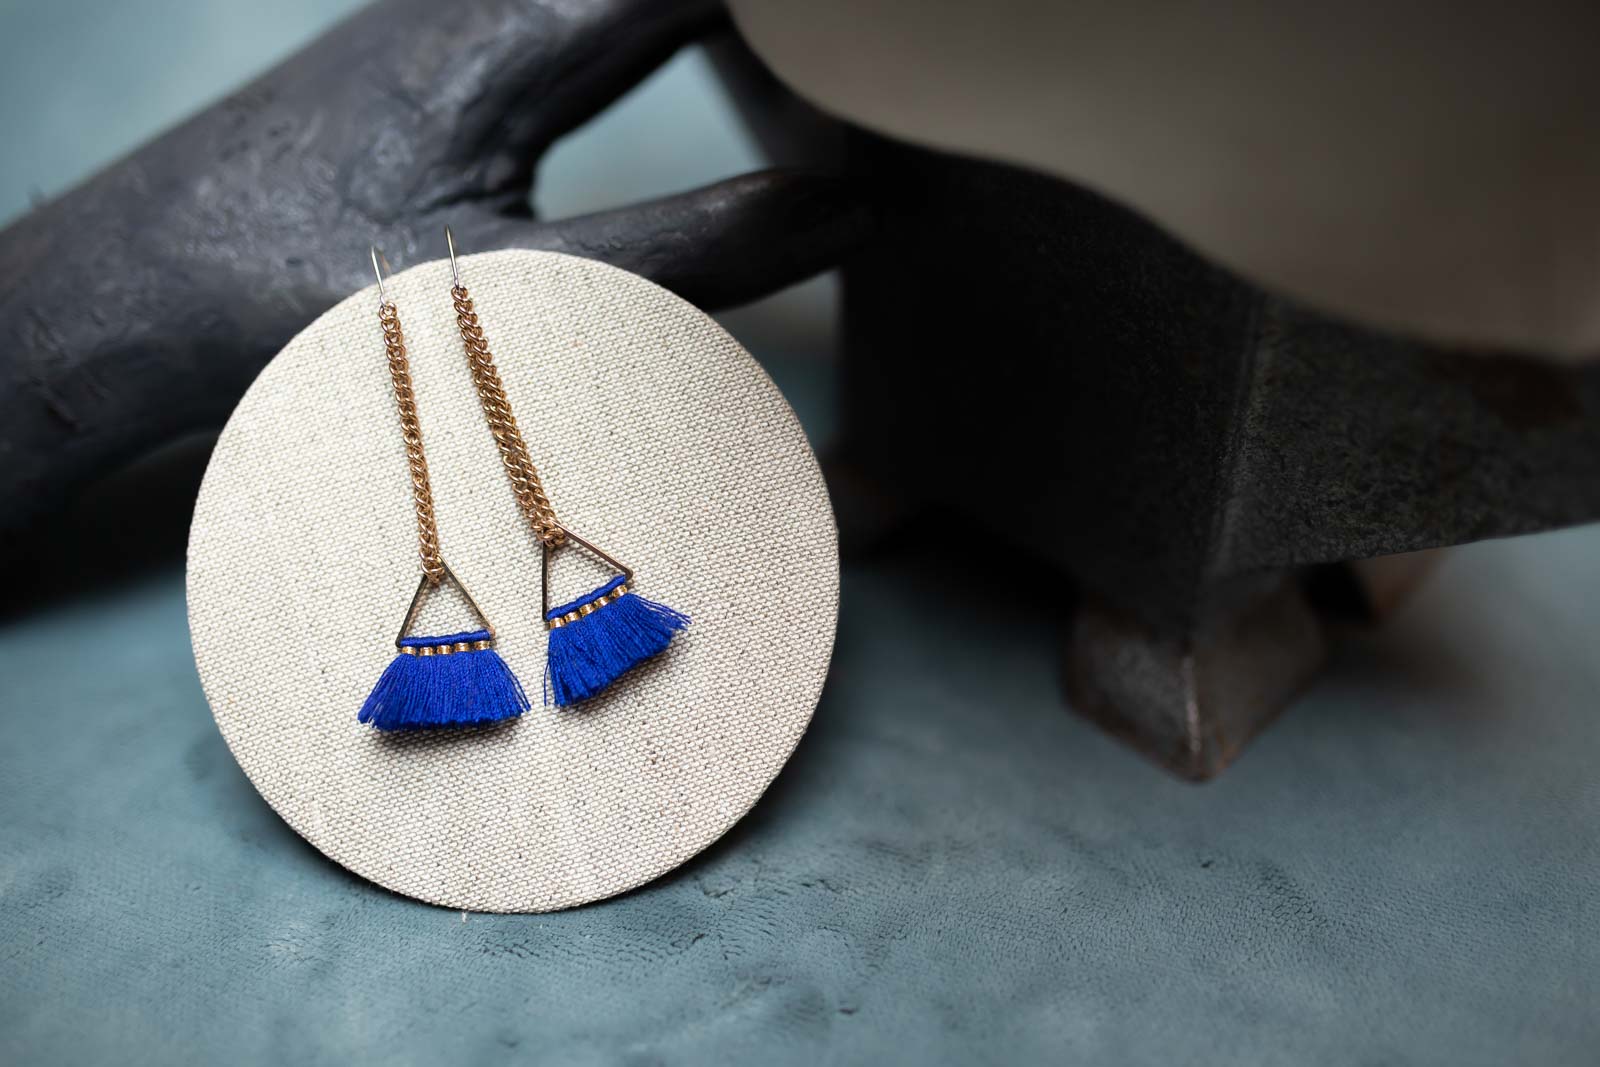 Midlength Chain Earring, looped with blue tassle pendant